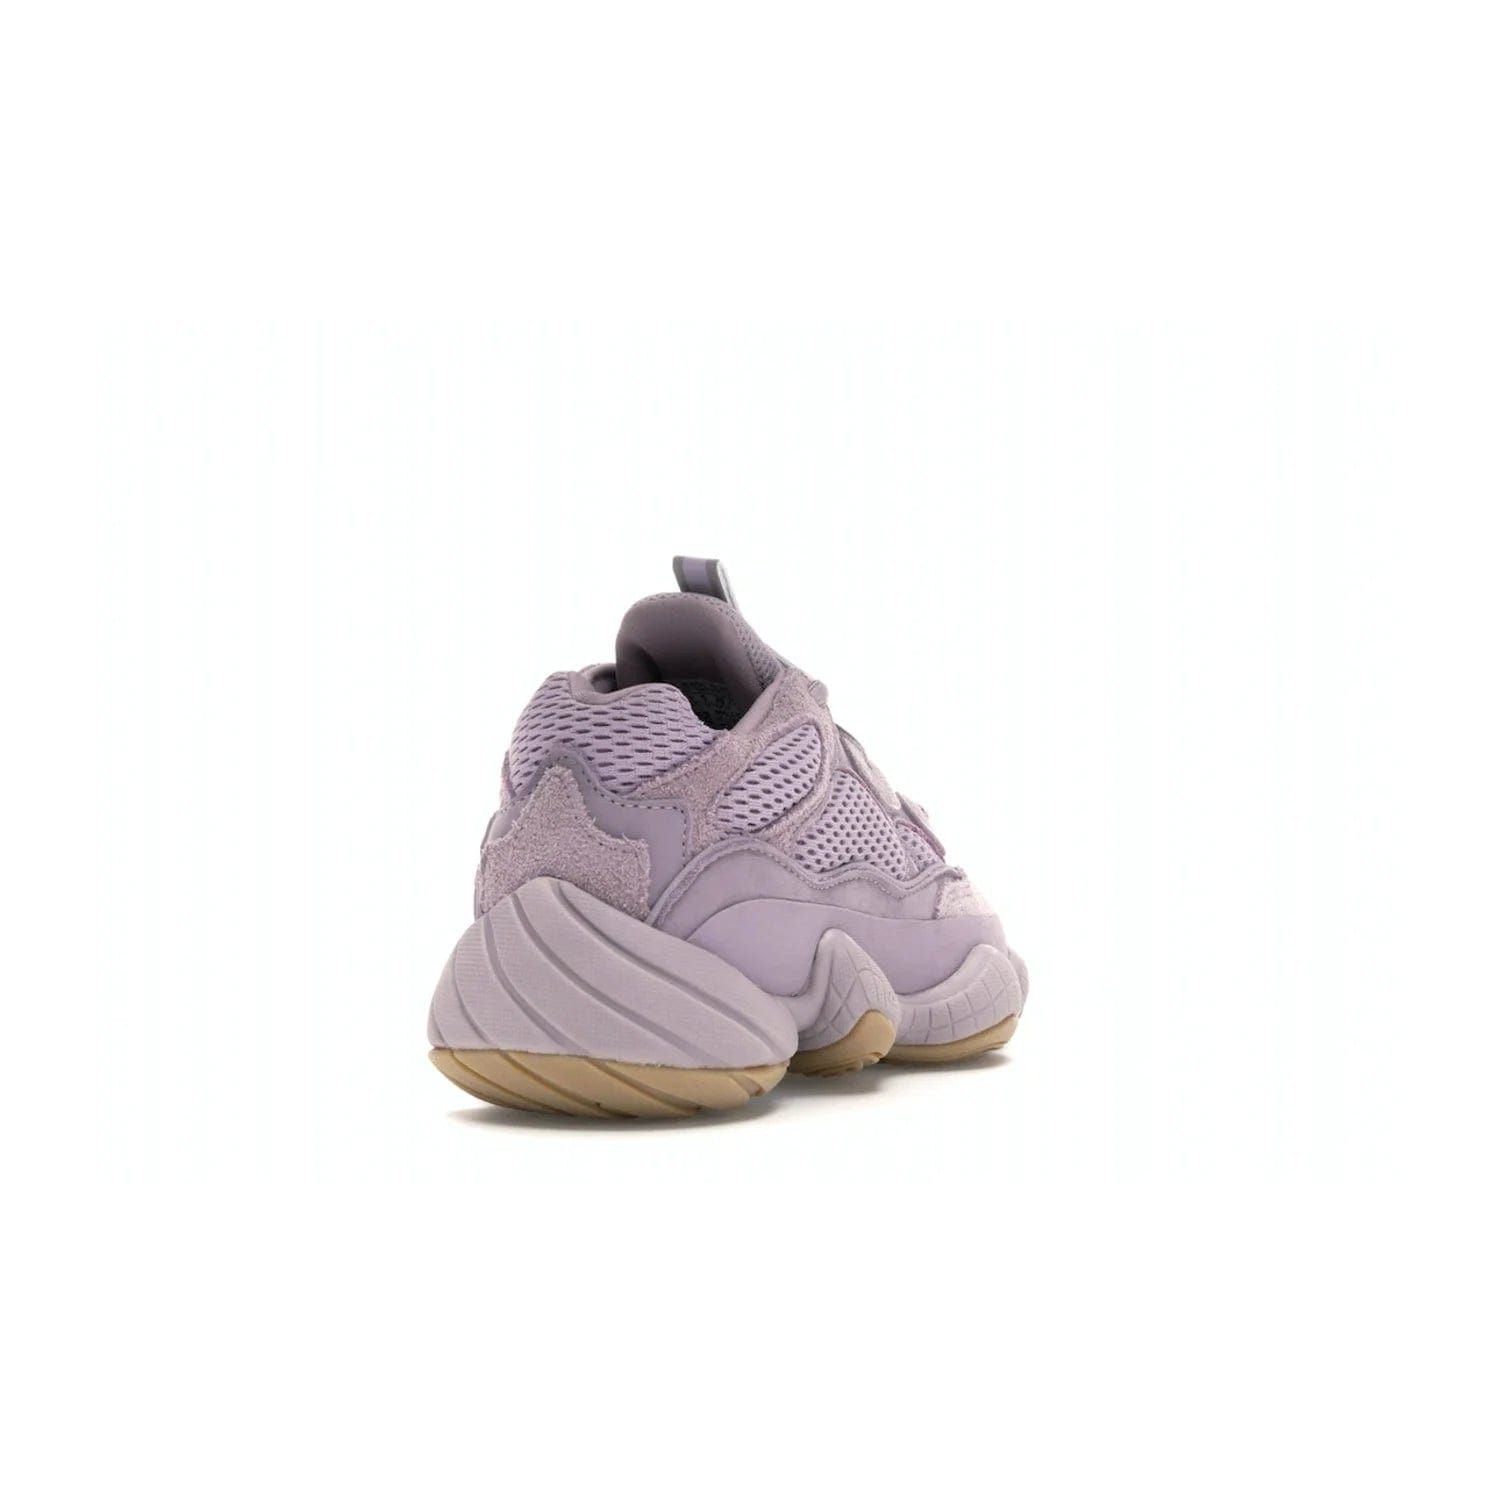 adidas Yeezy 500 Soft Vision - Image 30 - Only at www.BallersClubKickz.com - New adidas Yeezy 500 Soft Vision sneaker featuring a combination of mesh, leather, and suede in a classic Soft Vision colorway. Gum rubber outsole ensures durability and traction. An everyday sneaker that stands out from the crowd.